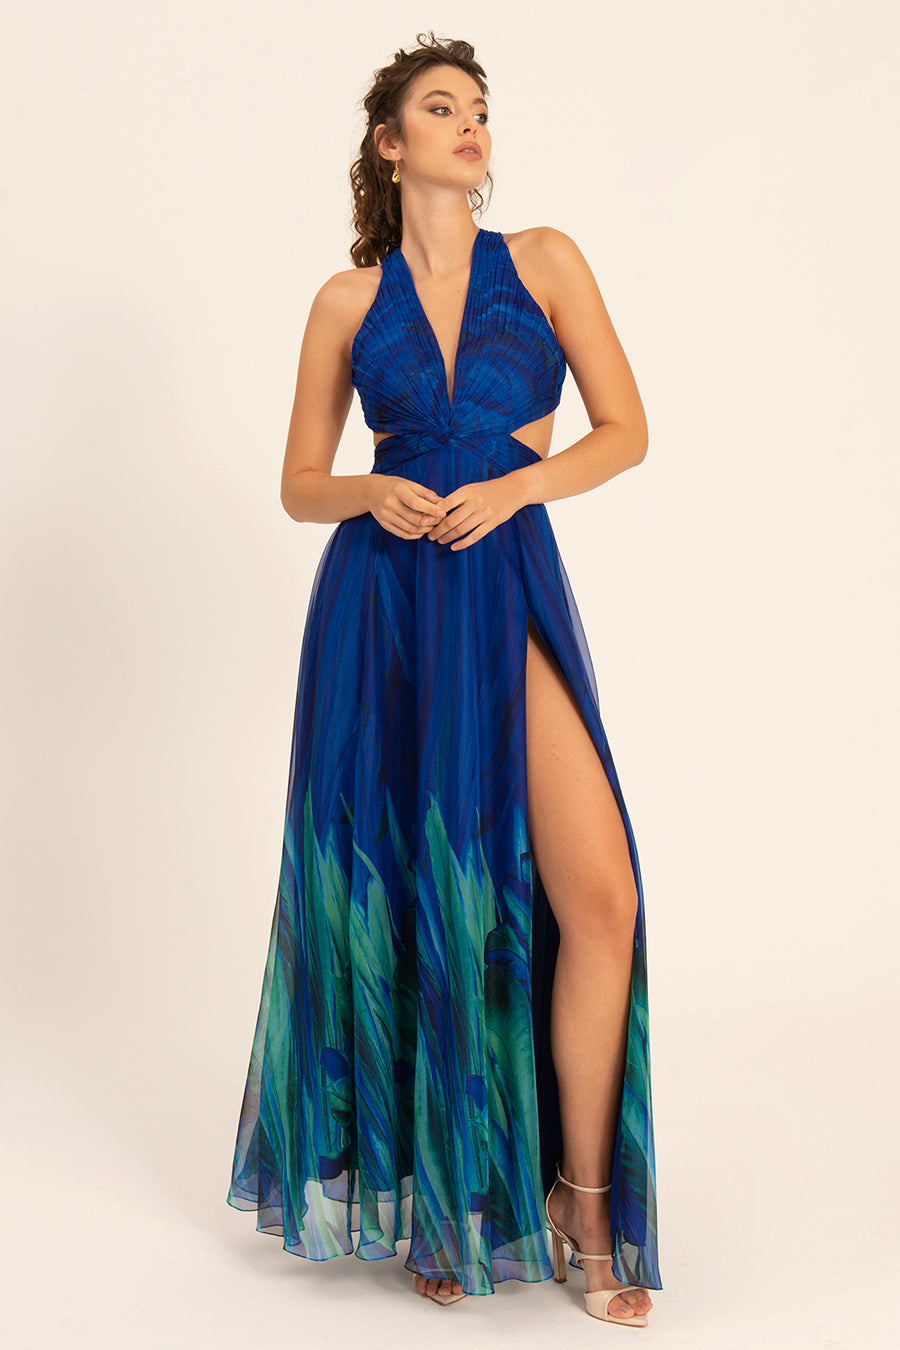 Alyne - Mystic Evenings | Evening and Prom Dresses